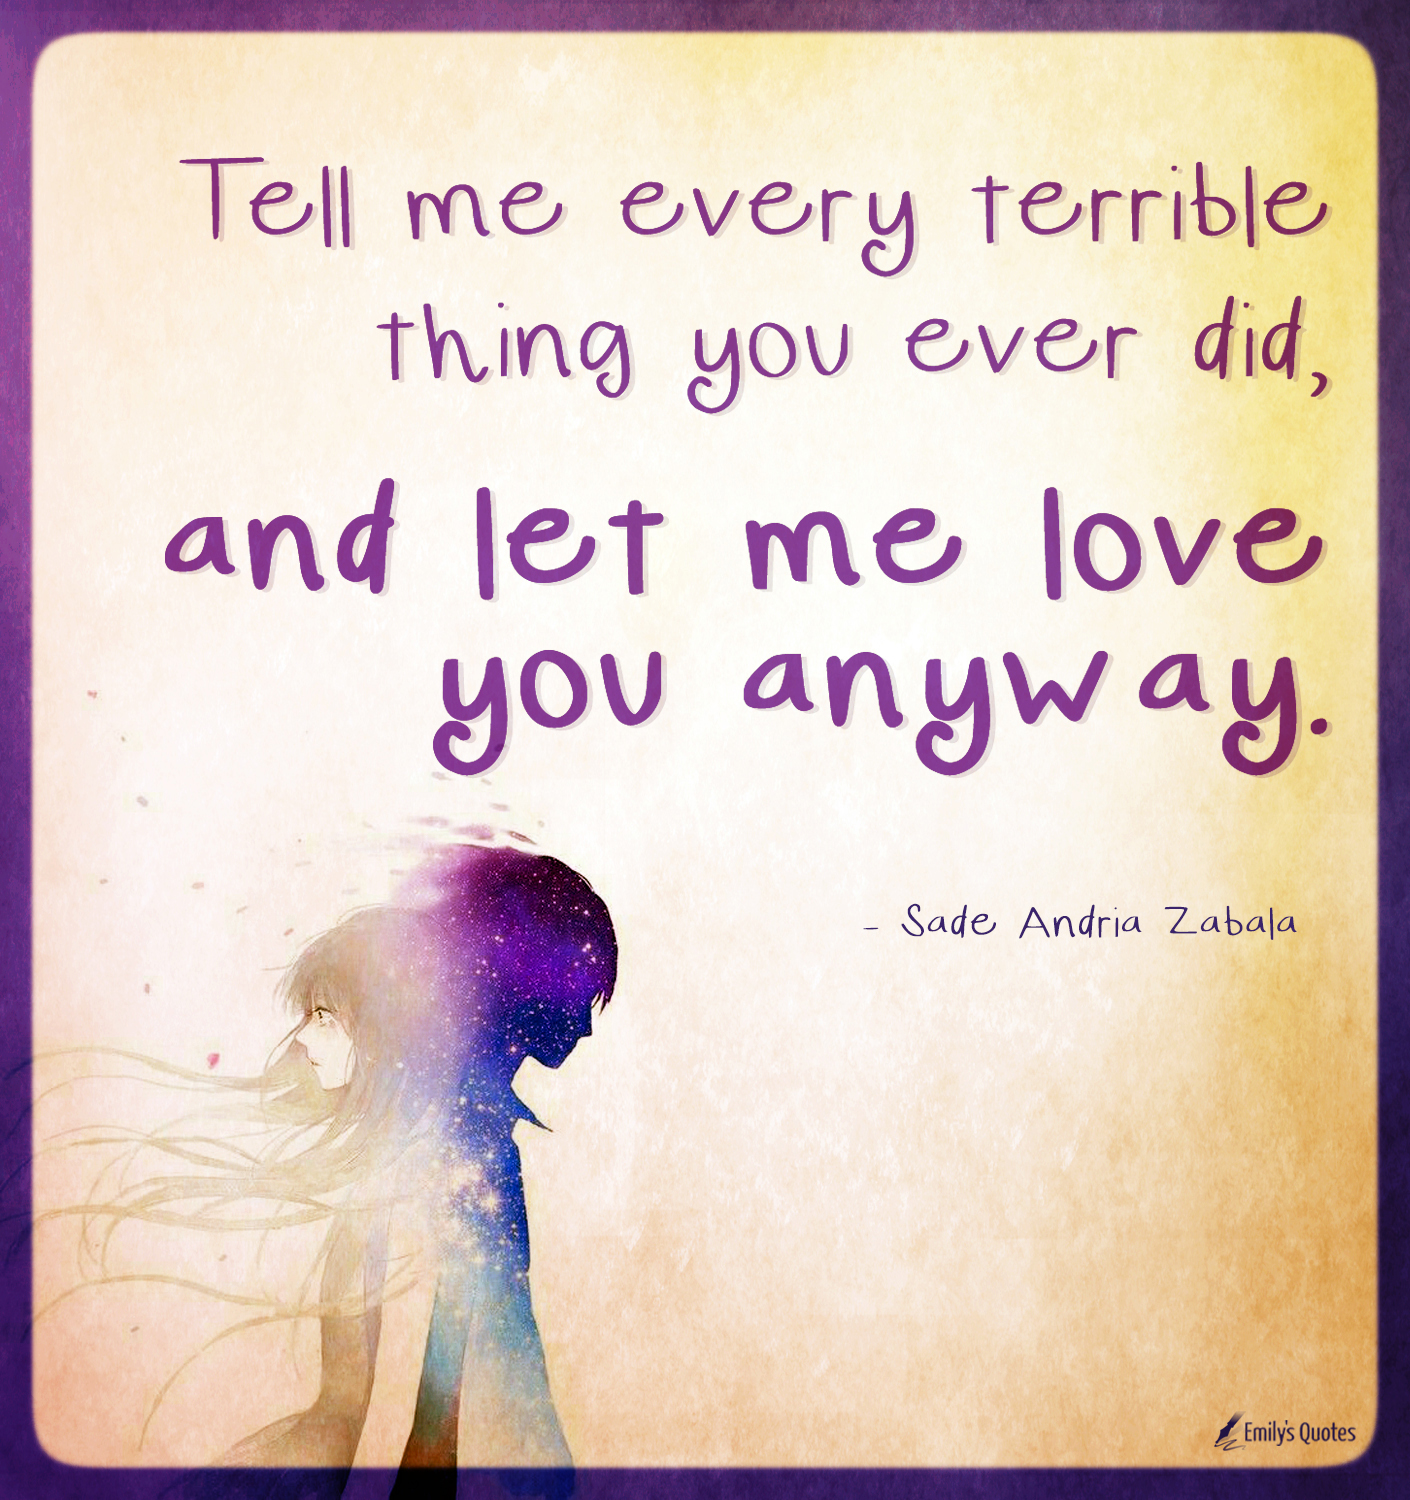 Tell Me Every Terrible Thing You Ever Did And Let Me Love You Anyway Popular Inspirational Quotes At Emilysquotes